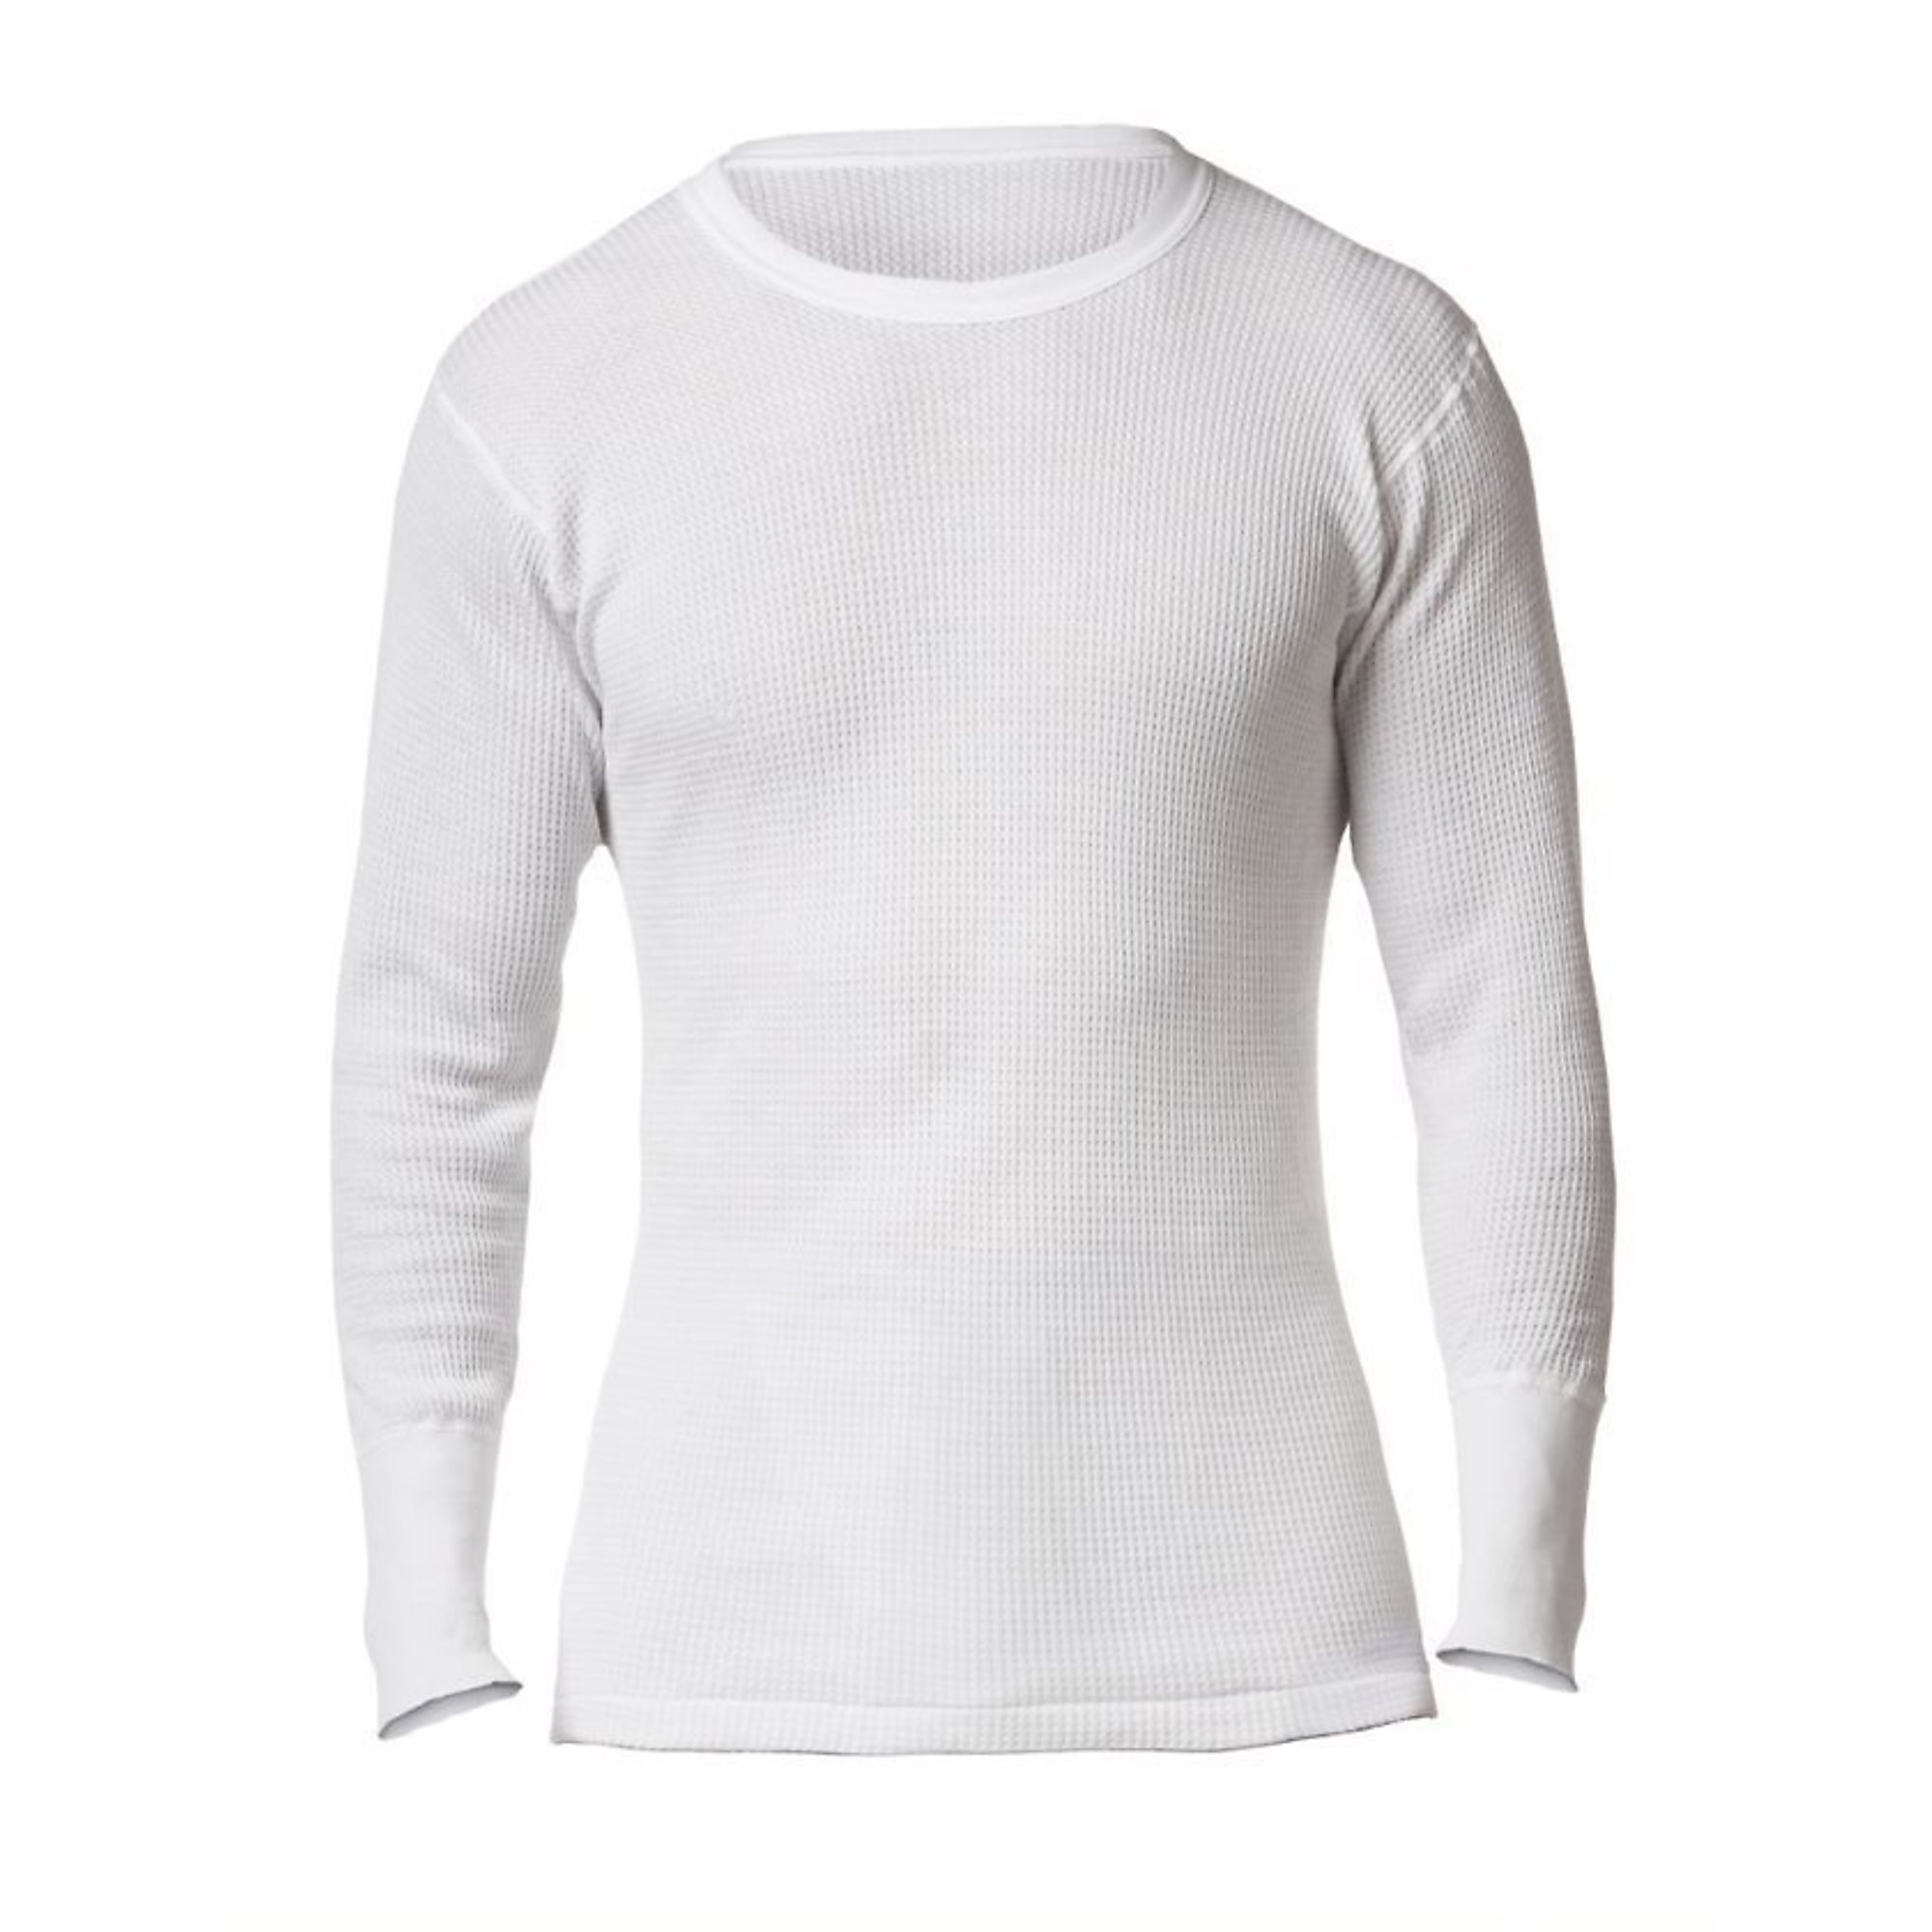 Stanfield's, Men's Thermal Waffle Knit Long Sleeve Shirt, Size XL, Color  WHITE, Model# 6623-White-XL